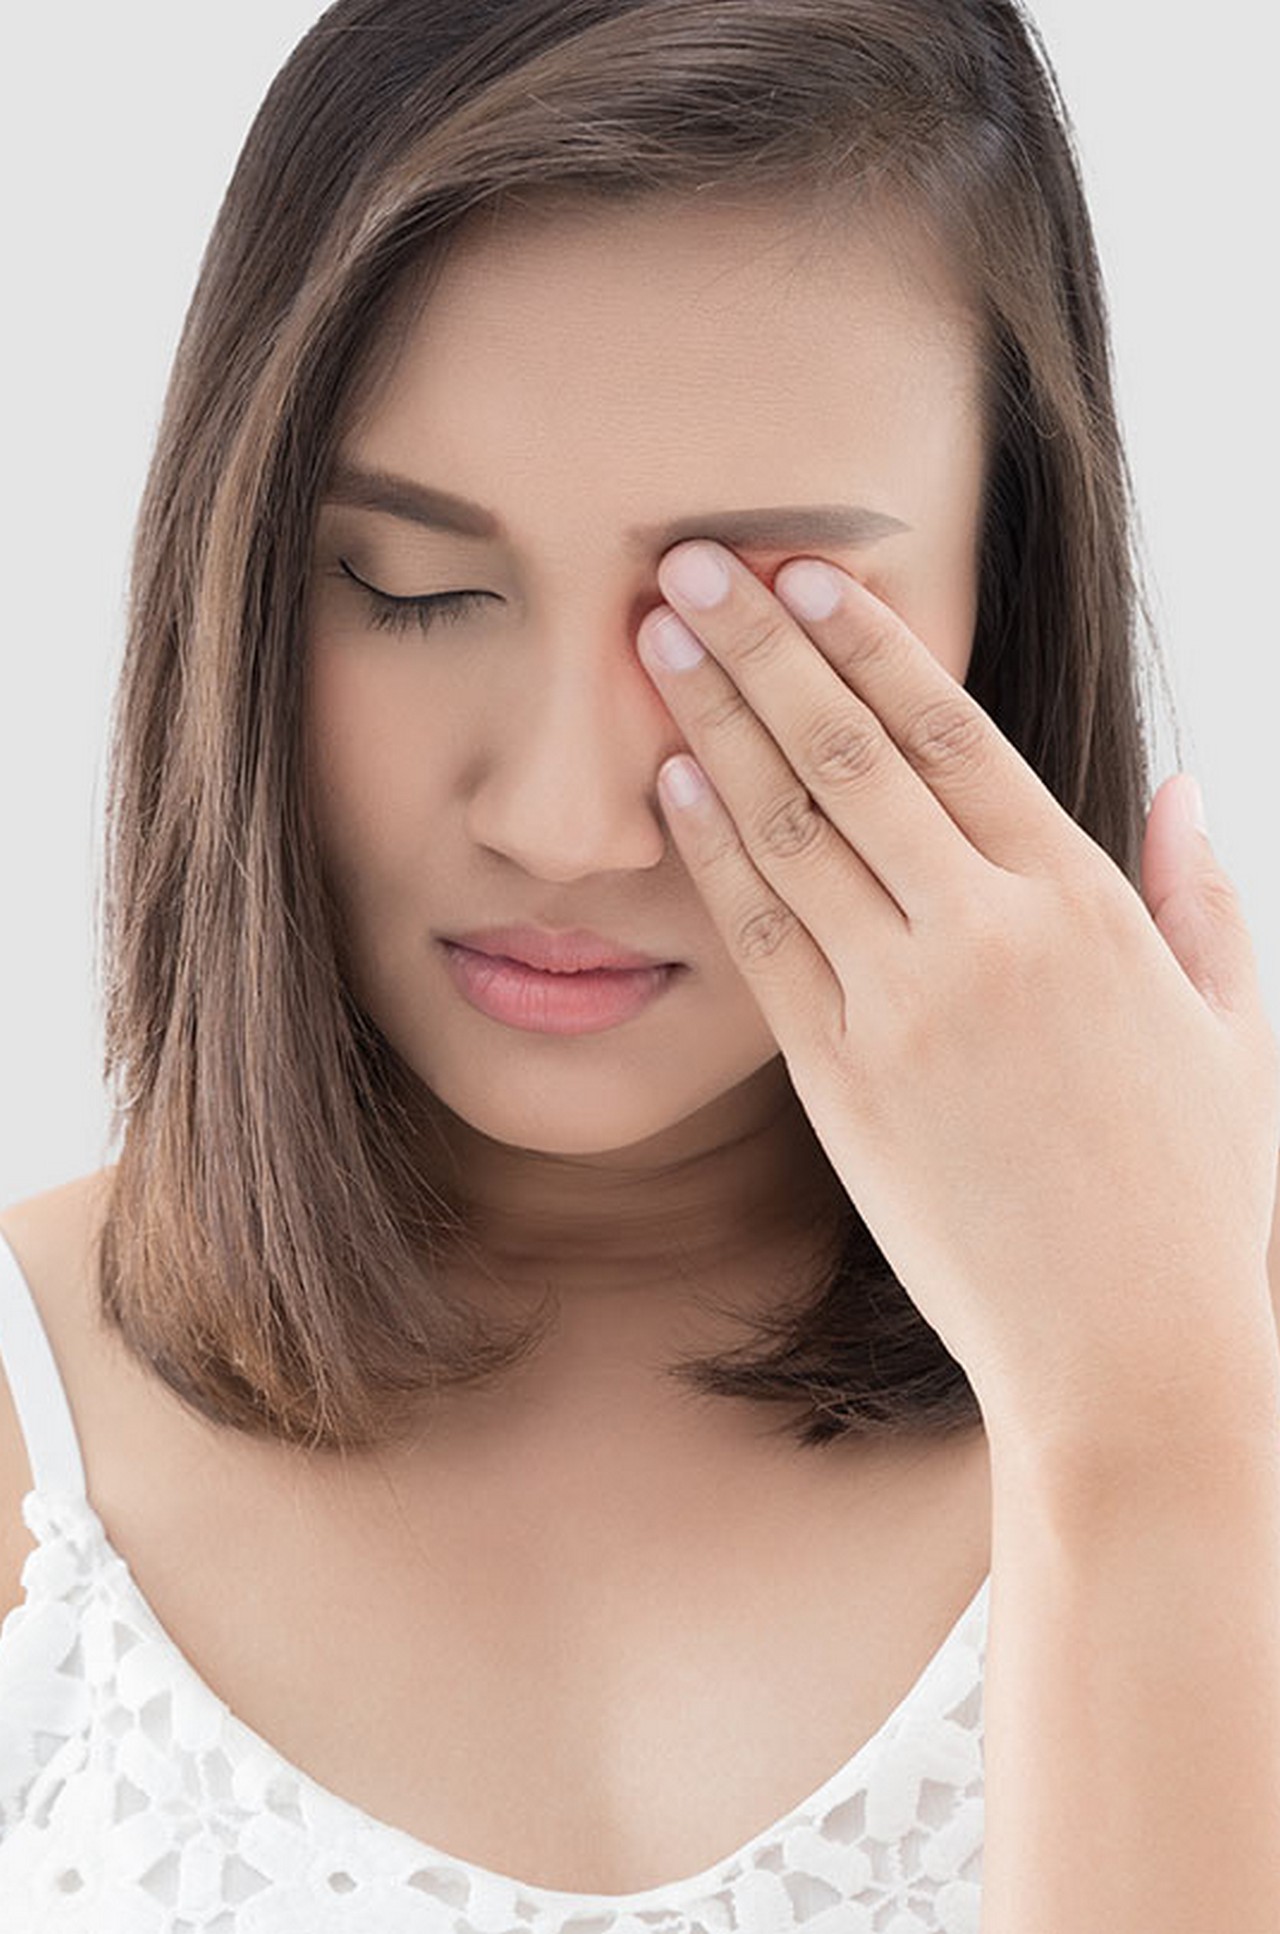  10 Effective Home Remedies To Treat Eye Infections